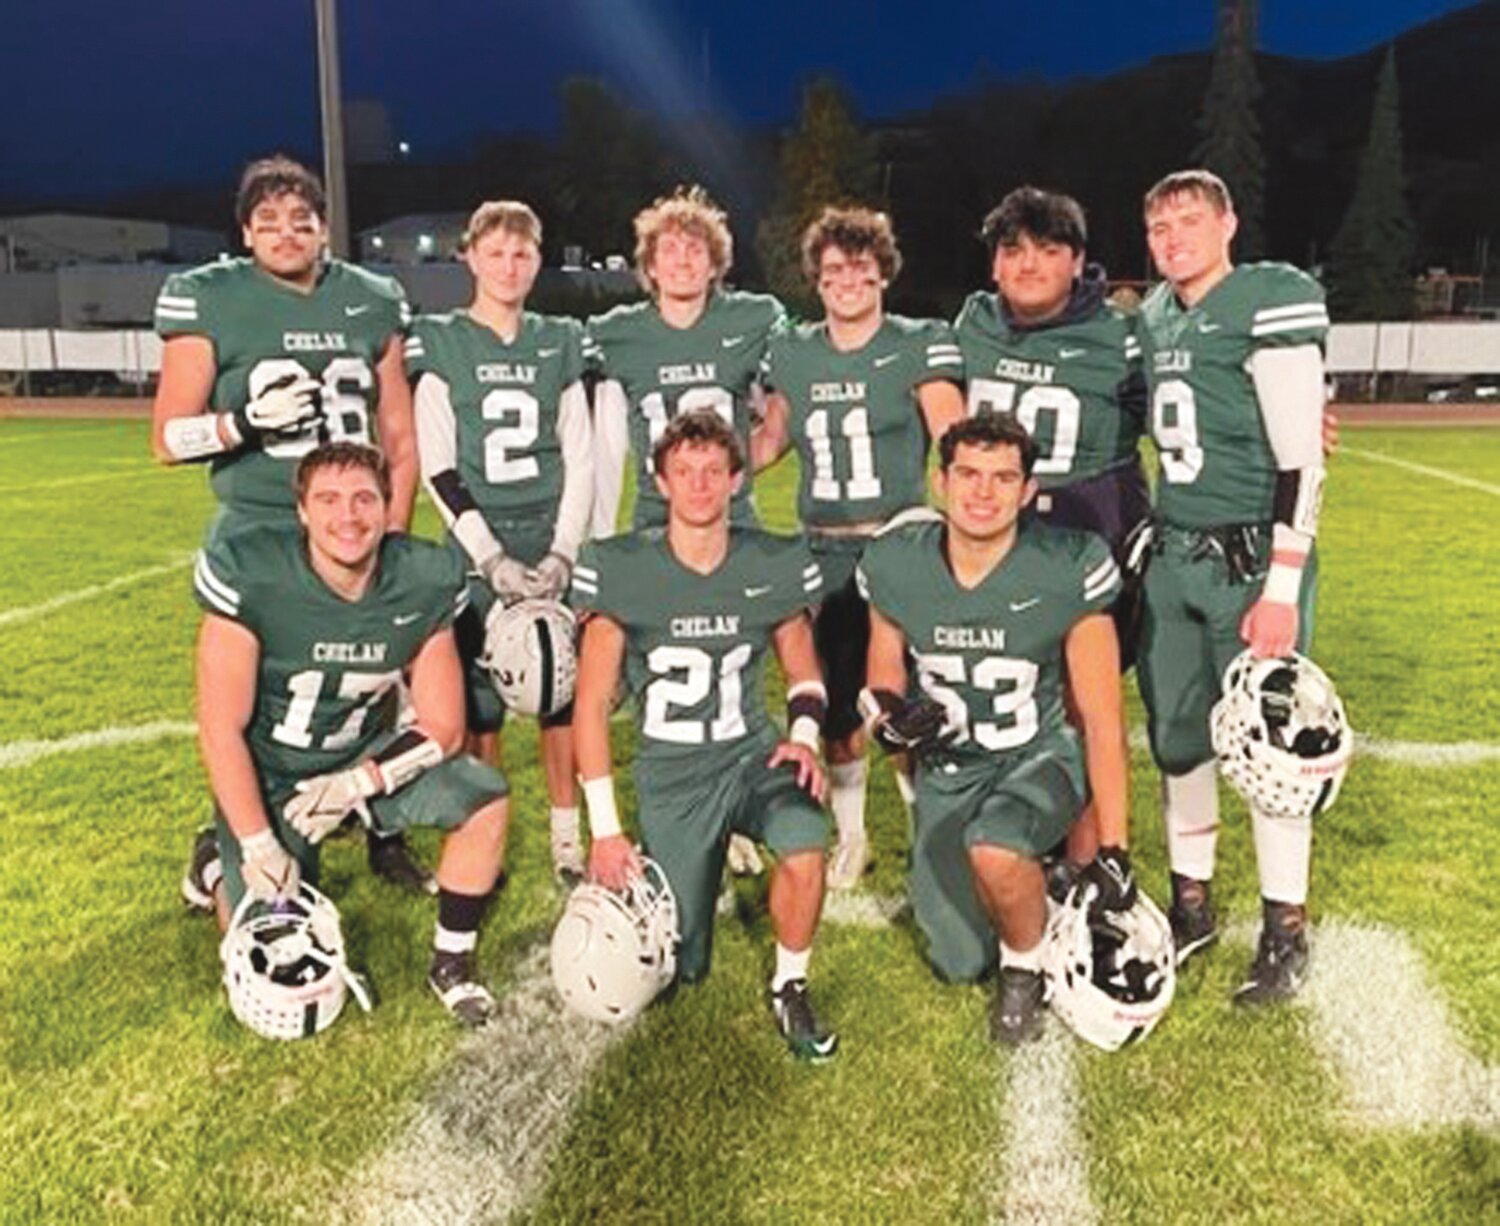 Chelan seniors playing their last season in a Goats uniform include back row from left, Josue Cazarez, Chase Woodley, Isaac Wilson, Lance Gogal, Luiz Arellano, and Ryan Rainville. Front row Landon Johnson, Mikel San Jose Getrueix, and Dominick Solorza.
MIKE MALTAIS/WARD MEDIA